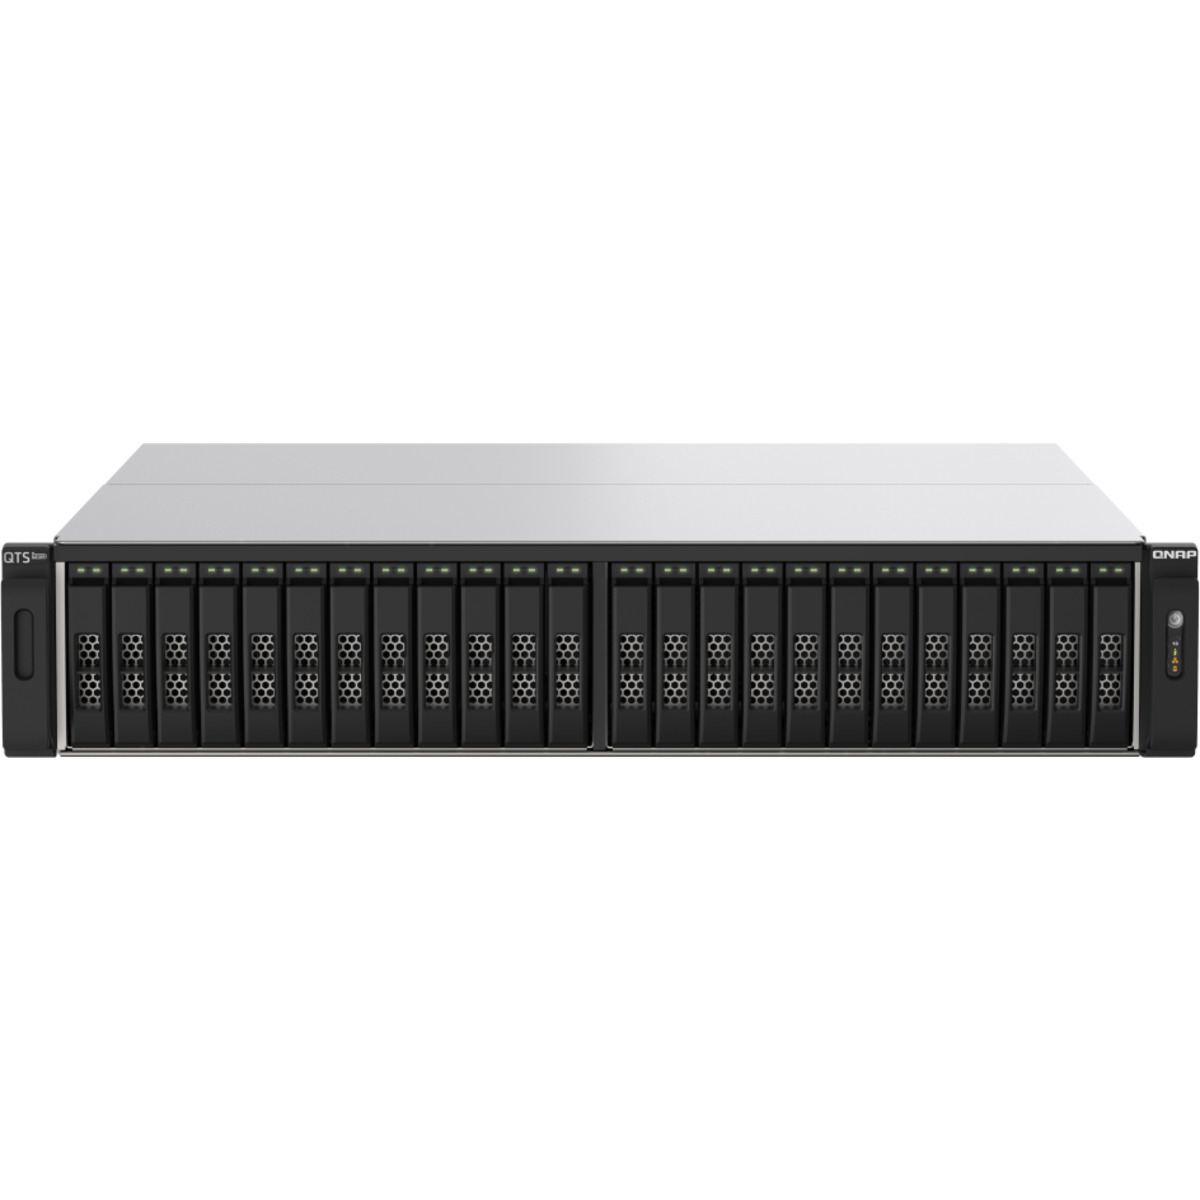 QNAP TS-h2490FU-7232P 34tb 24-Bay RackMount Large Business / Enterprise NAS - Network Attached Storage Device 17x2tb Sabrent Rocket 4 Plus SB-RKT4P-2TB  7000/6850MB/s M.2 2280 NVMe SSD CONSUMER Class Drives Installed - Burn-In Tested TS-h2490FU-7232P